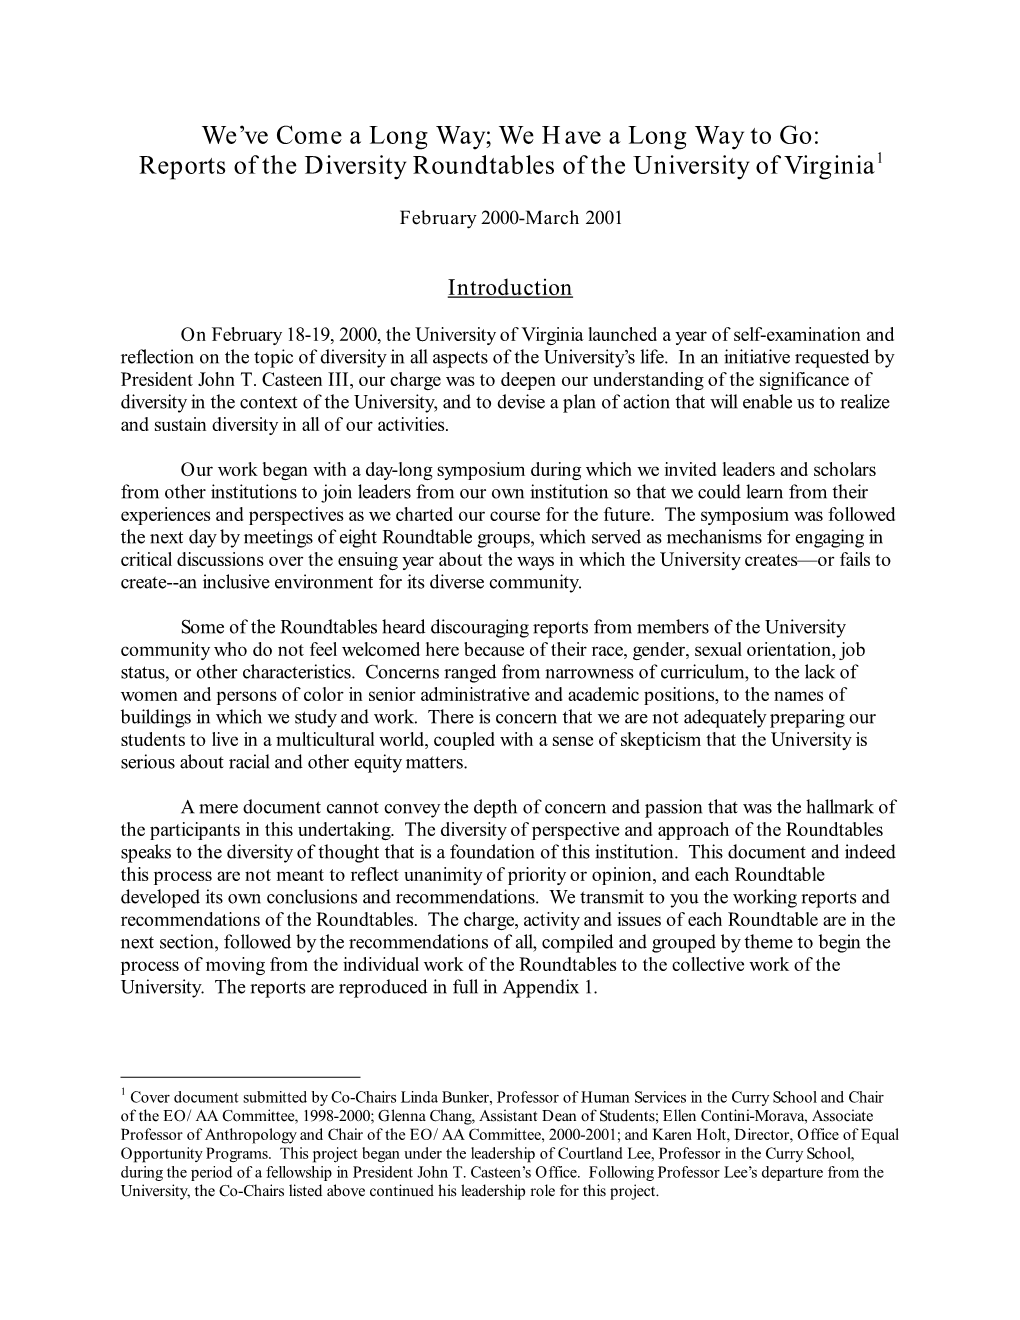 We Have a Long Way to Go: Reports of the Diversity Roundtables of the University of Virginia1